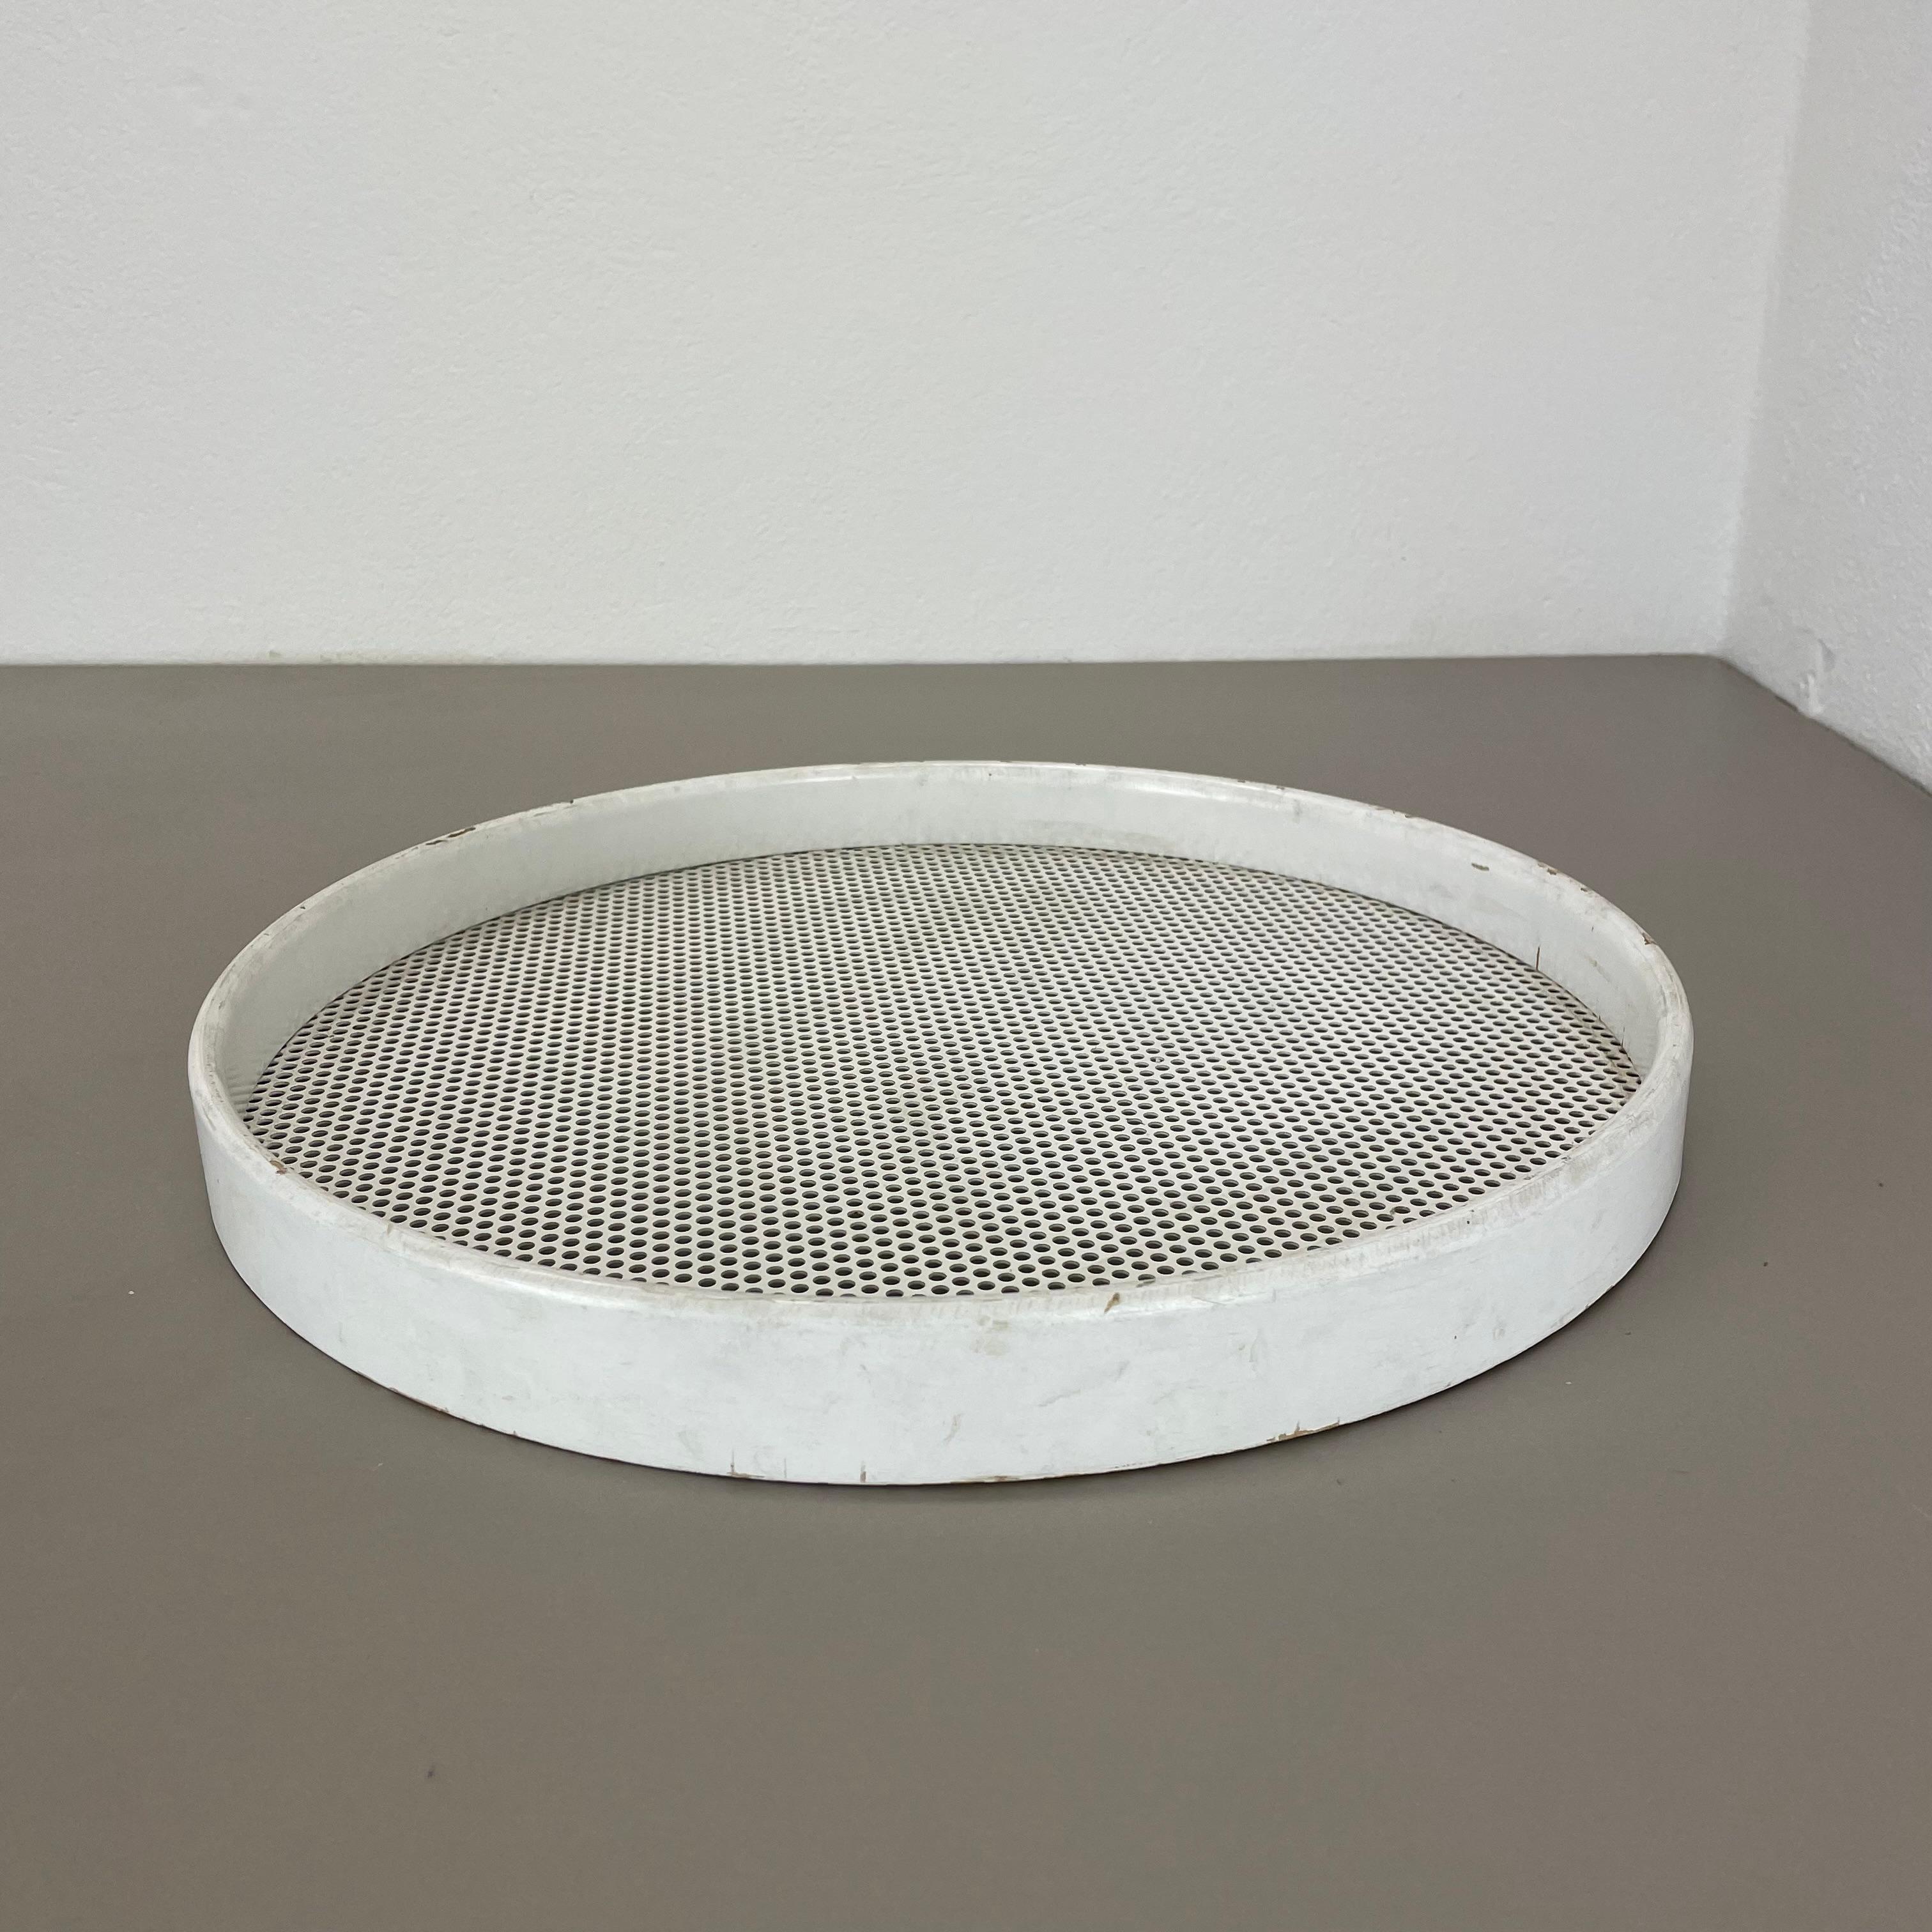 Metal tray.

In style of Mathieu Matégot.

Origin: France,

1970s.

This original vintage tray element was produced in the 1970s in France. It was made of a wooden white lacquered round frame with a middle metal element in hole pattern optic which